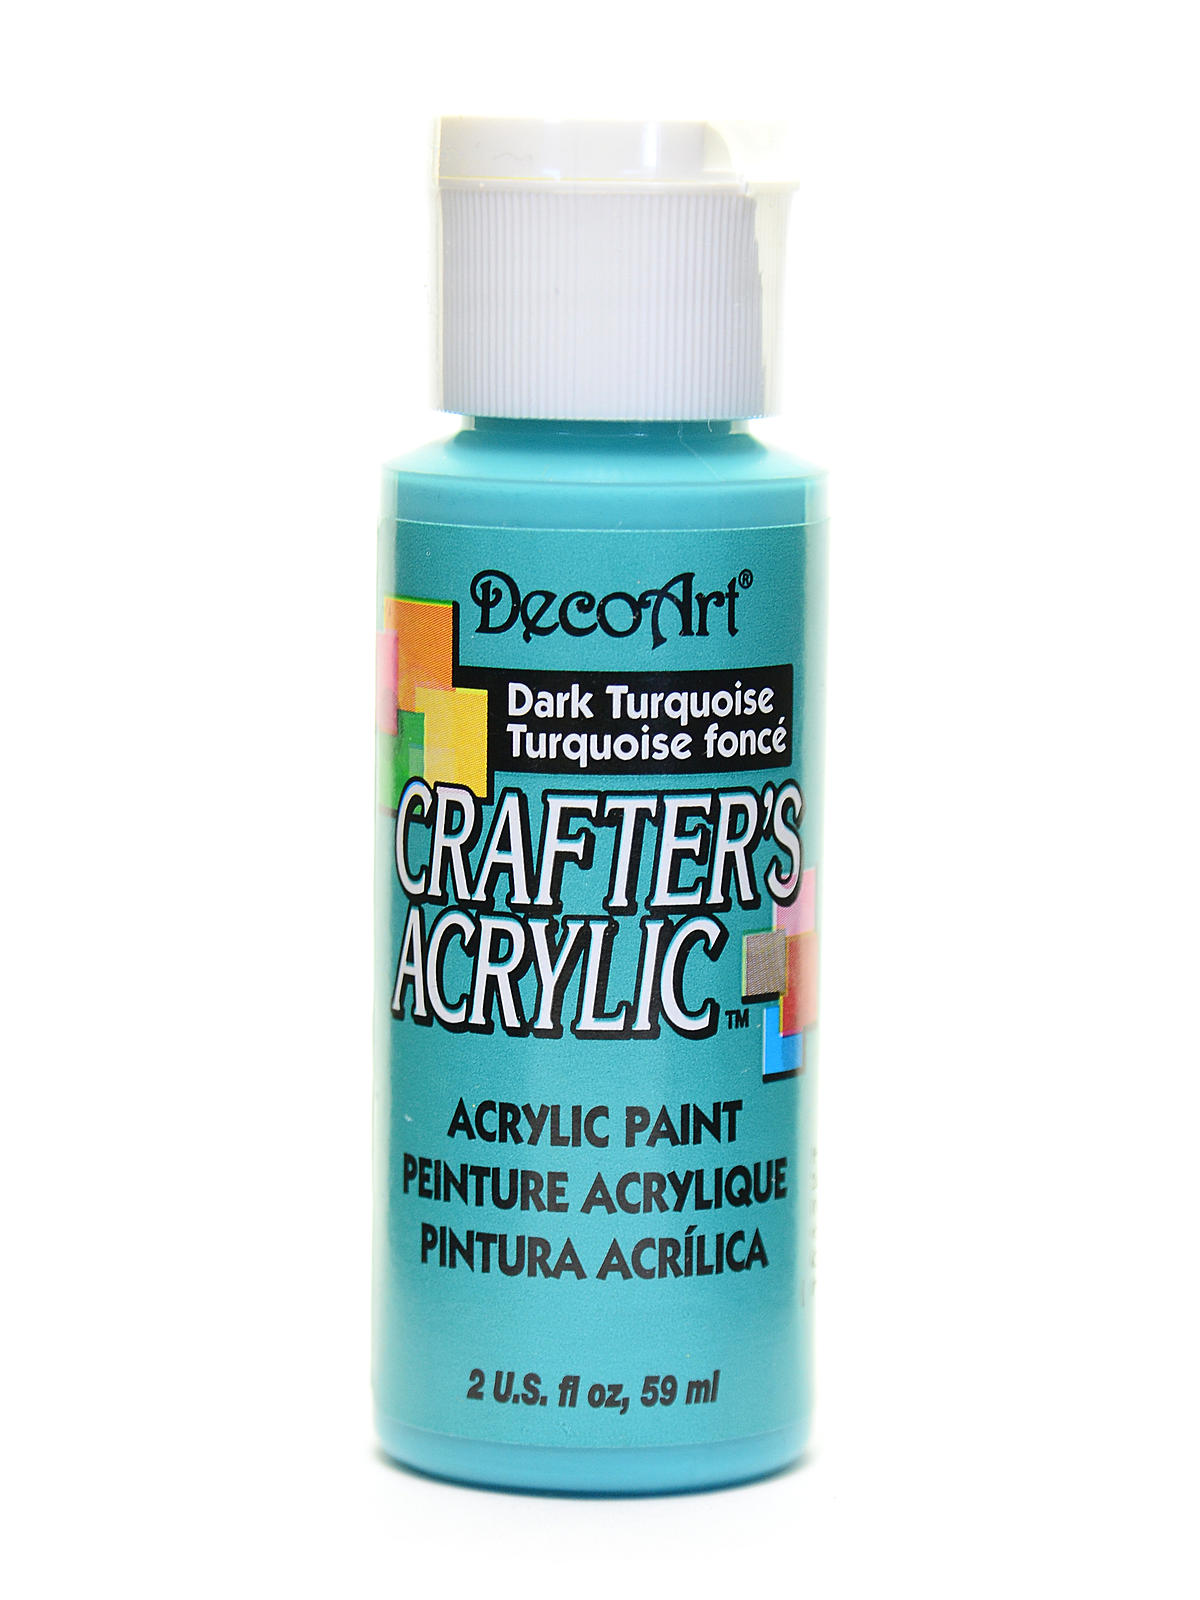 Crafters Acrylic 2 Oz Dark Turquoise